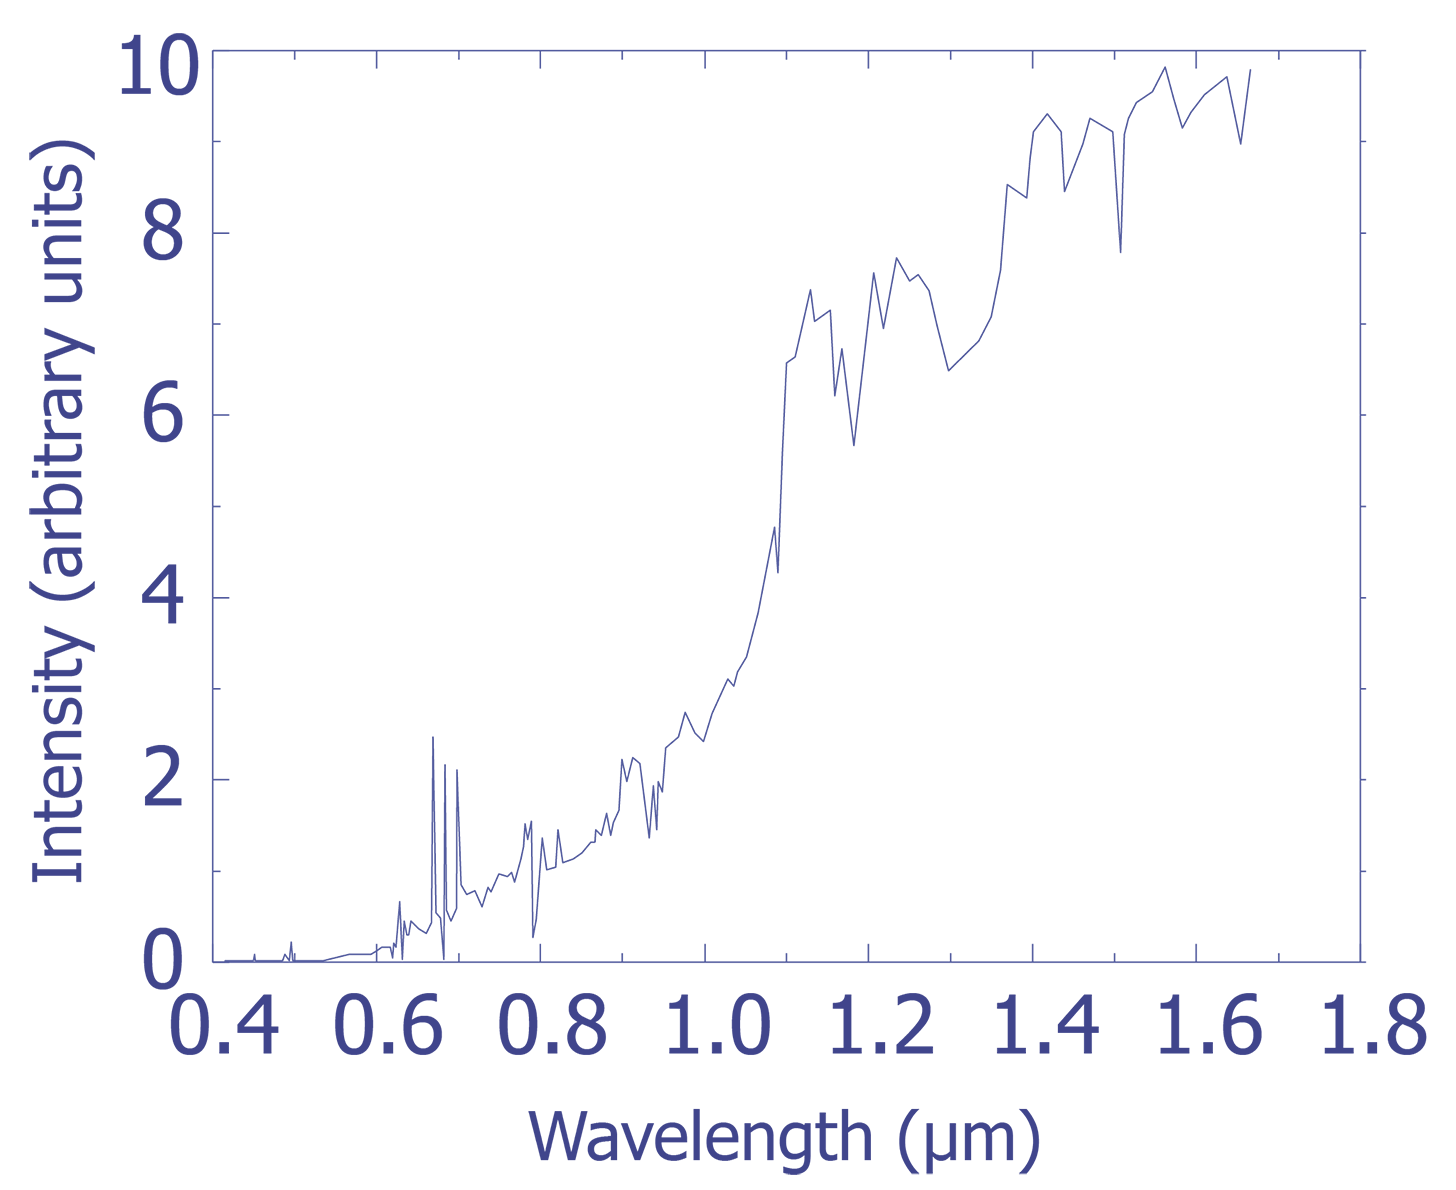 Measured spectrum from n-MOSFET saturation emission.